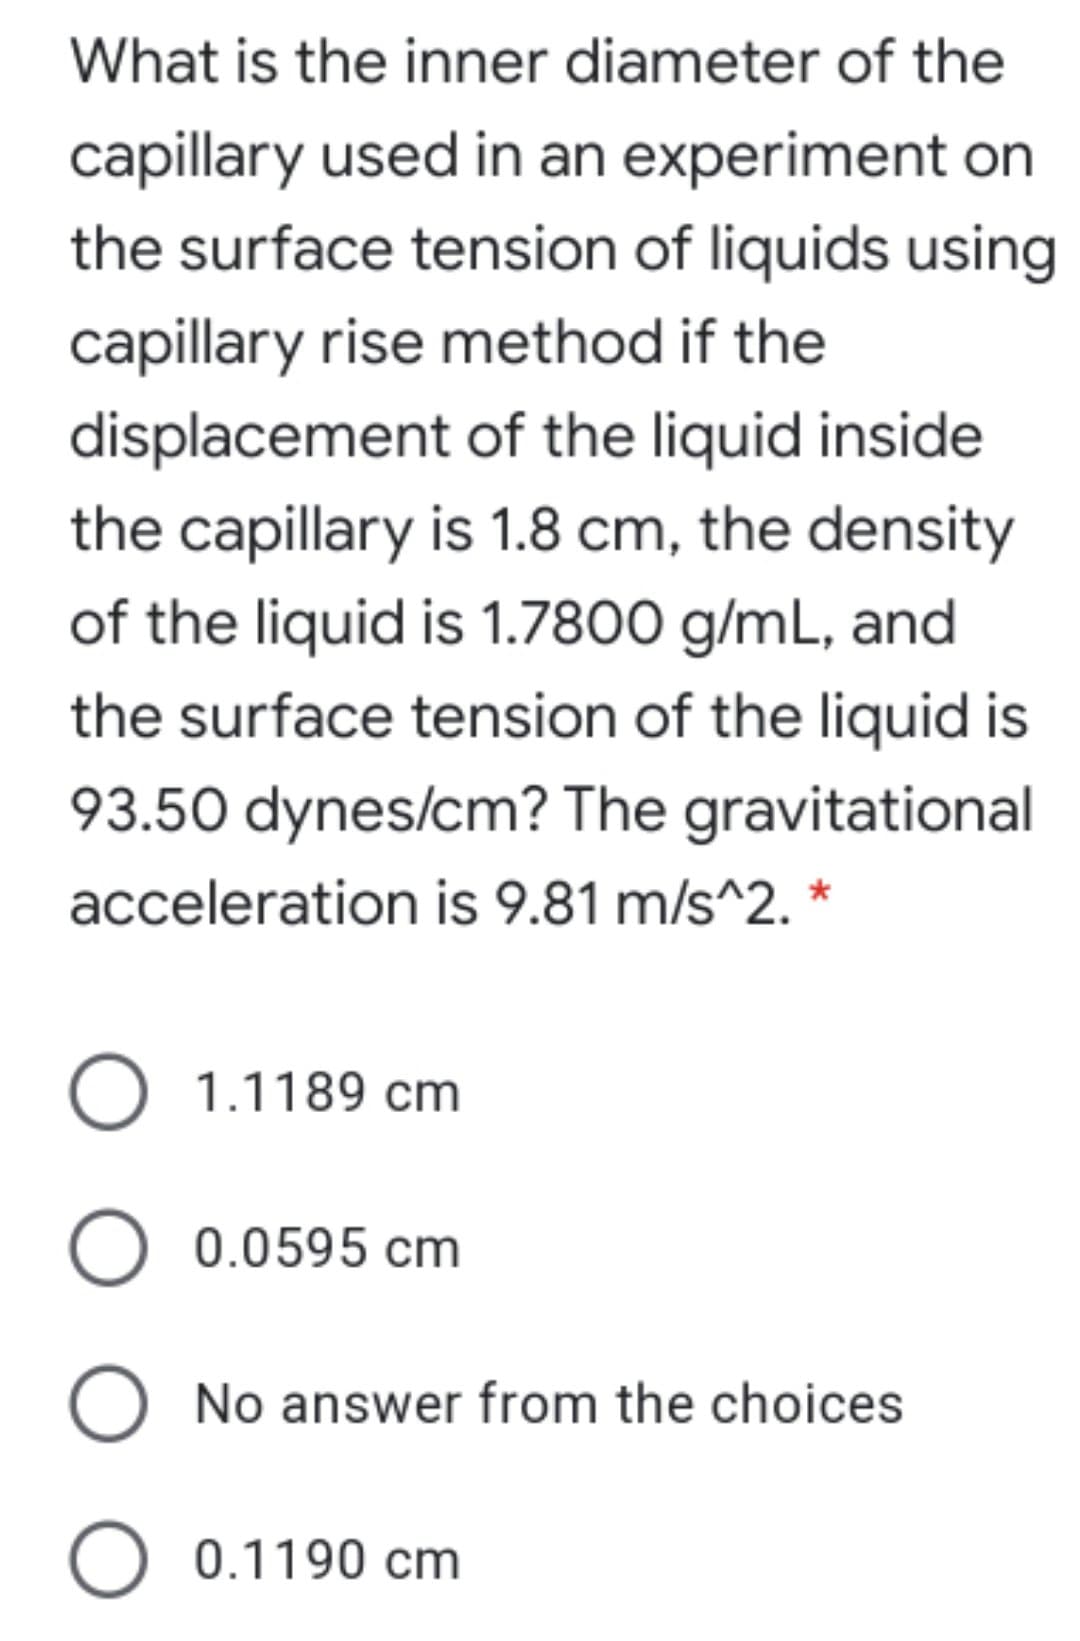 What is the inner diameter of the
capillary used in an experiment on
the surface tension of liquids using
capillary rise method if the
displacement of the liquid inside
the capillary is 1.8 cm, the density
of the liquid is 1.7800 g/mL, and
the surface tension of the liquid is
93.50 dynes/cm? The gravitational
acceleration is 9.81 m/s^2. *
O 1.1189 cm
O 0.0595 cm
O No answer from the choices
O 0.1190 cm
